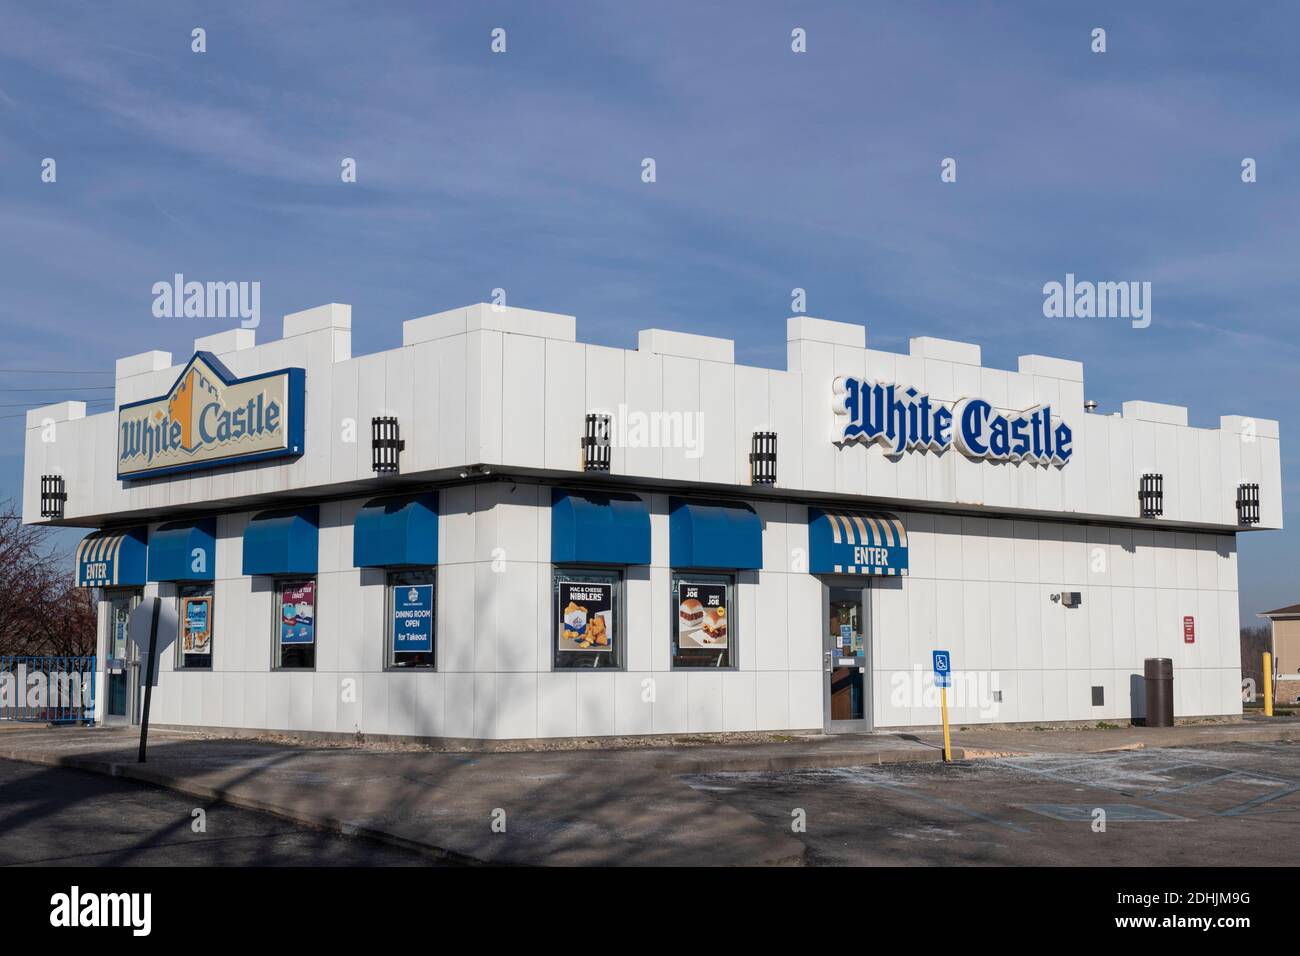 Greenfield - Circa December 2020: White Castle Hamburger Location. White Castle Serves 2 by 2 Inch Sliders. Stock Photo